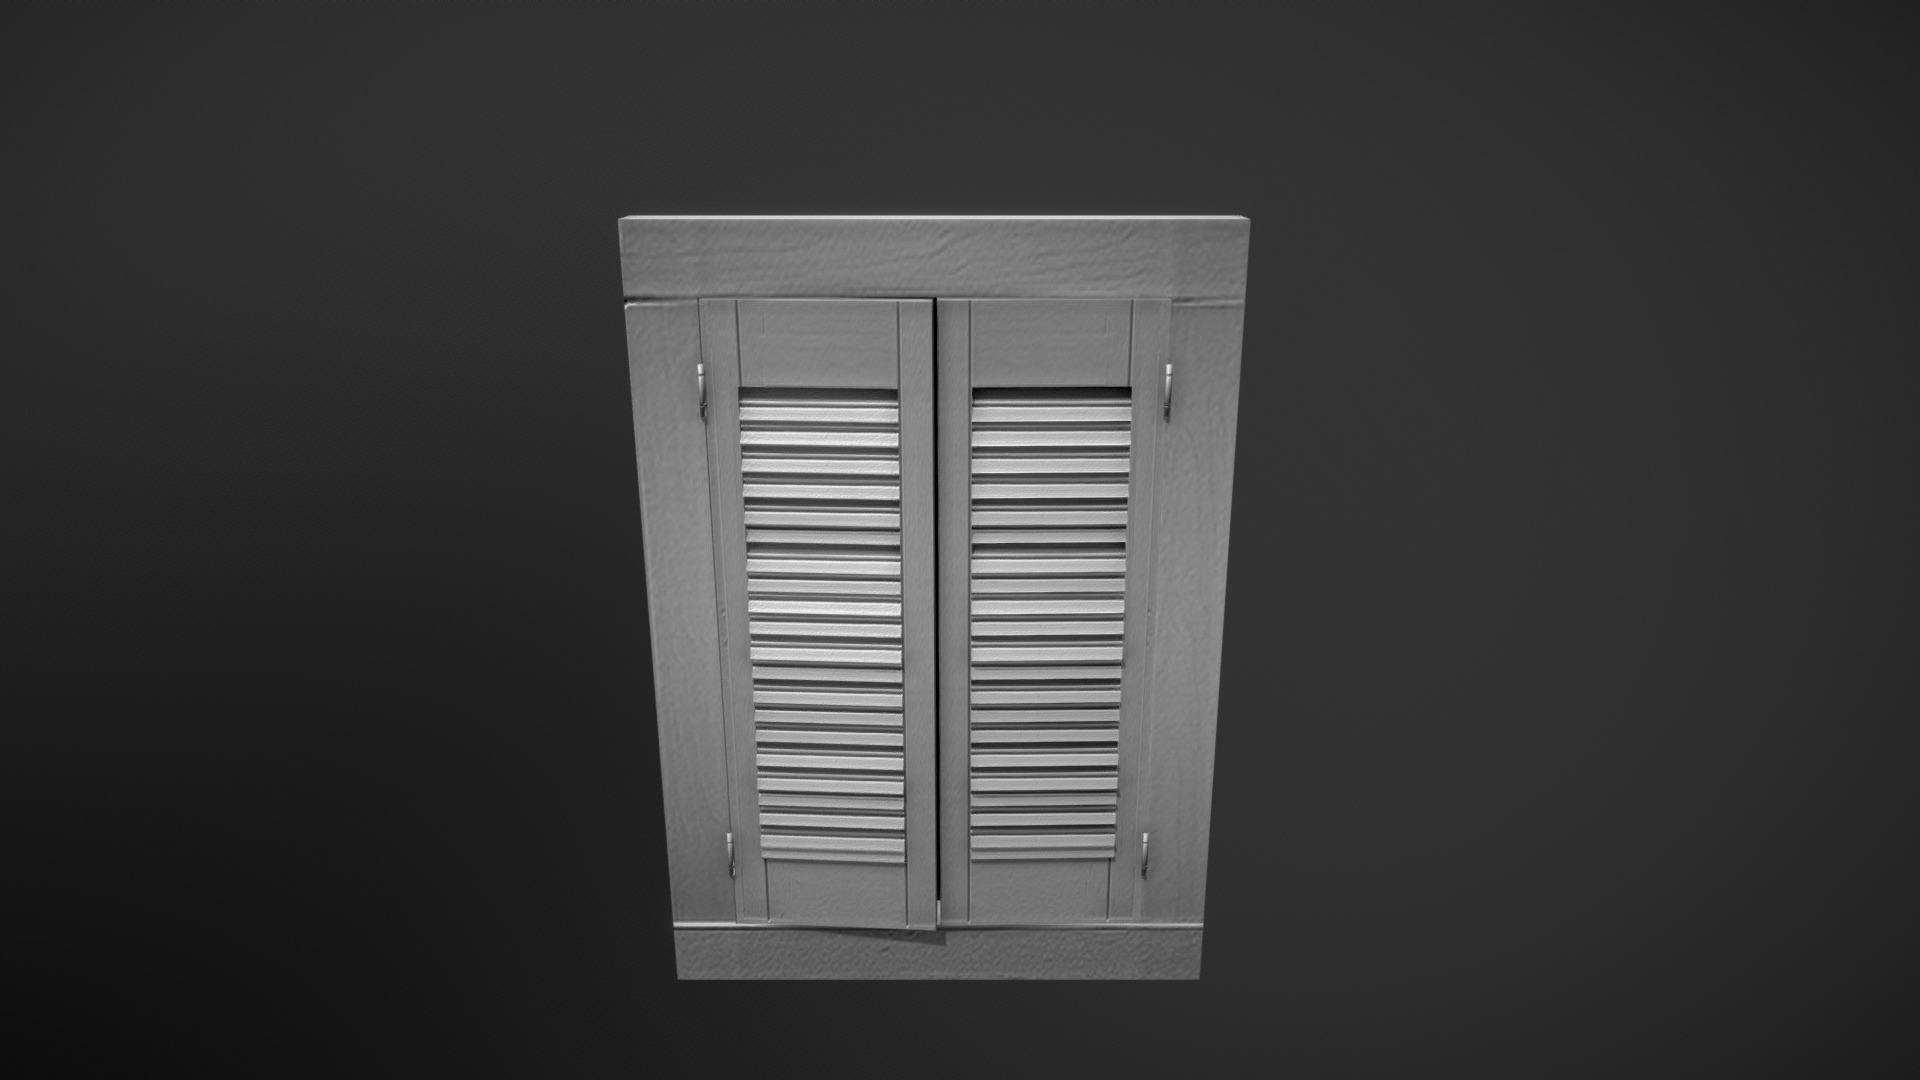 3D model Crawl Space- Door Animated - This is a 3D model of the Crawl Space- Door Animated. The 3D model is about a window with blinds.